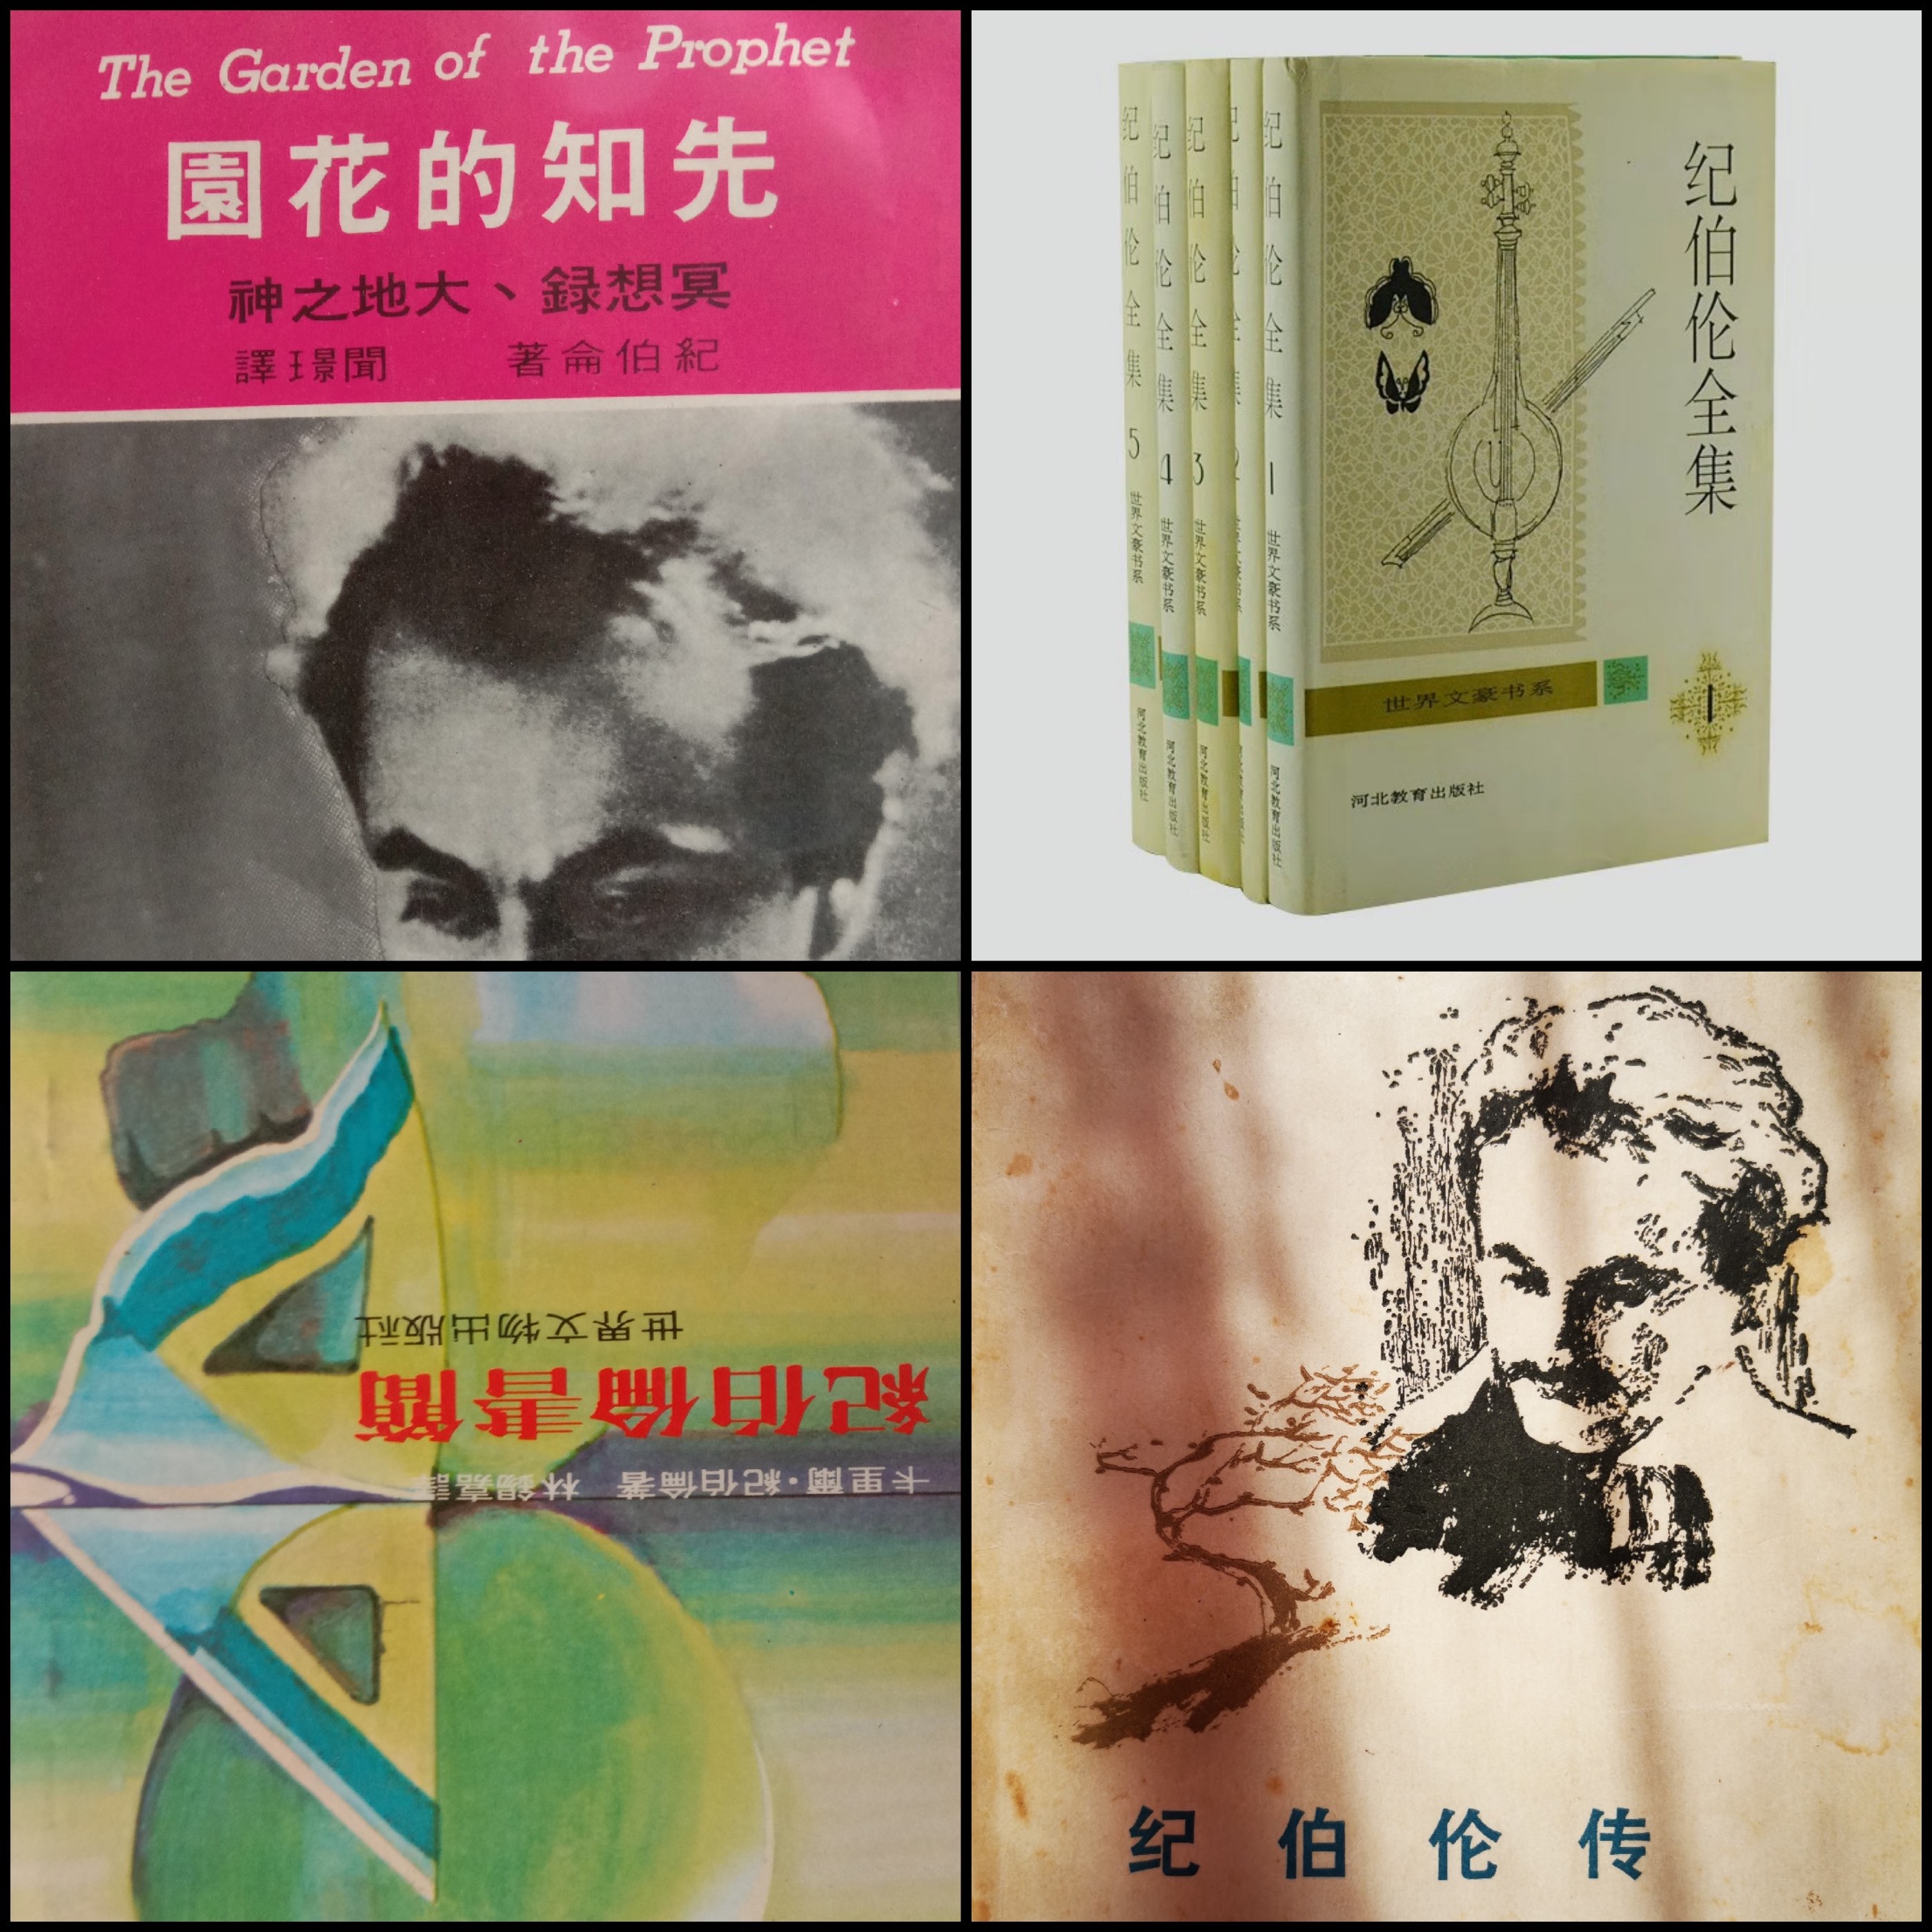 (left to right) The Prophet’s Garden (Jing Wen) 1974, The Letters of Gibran (Xijia Lin )1977, The Complete Works of GIbran (Hebei Education Publishing House)1994, The Biography of Gibran (Jingfen Cheng) 1986.